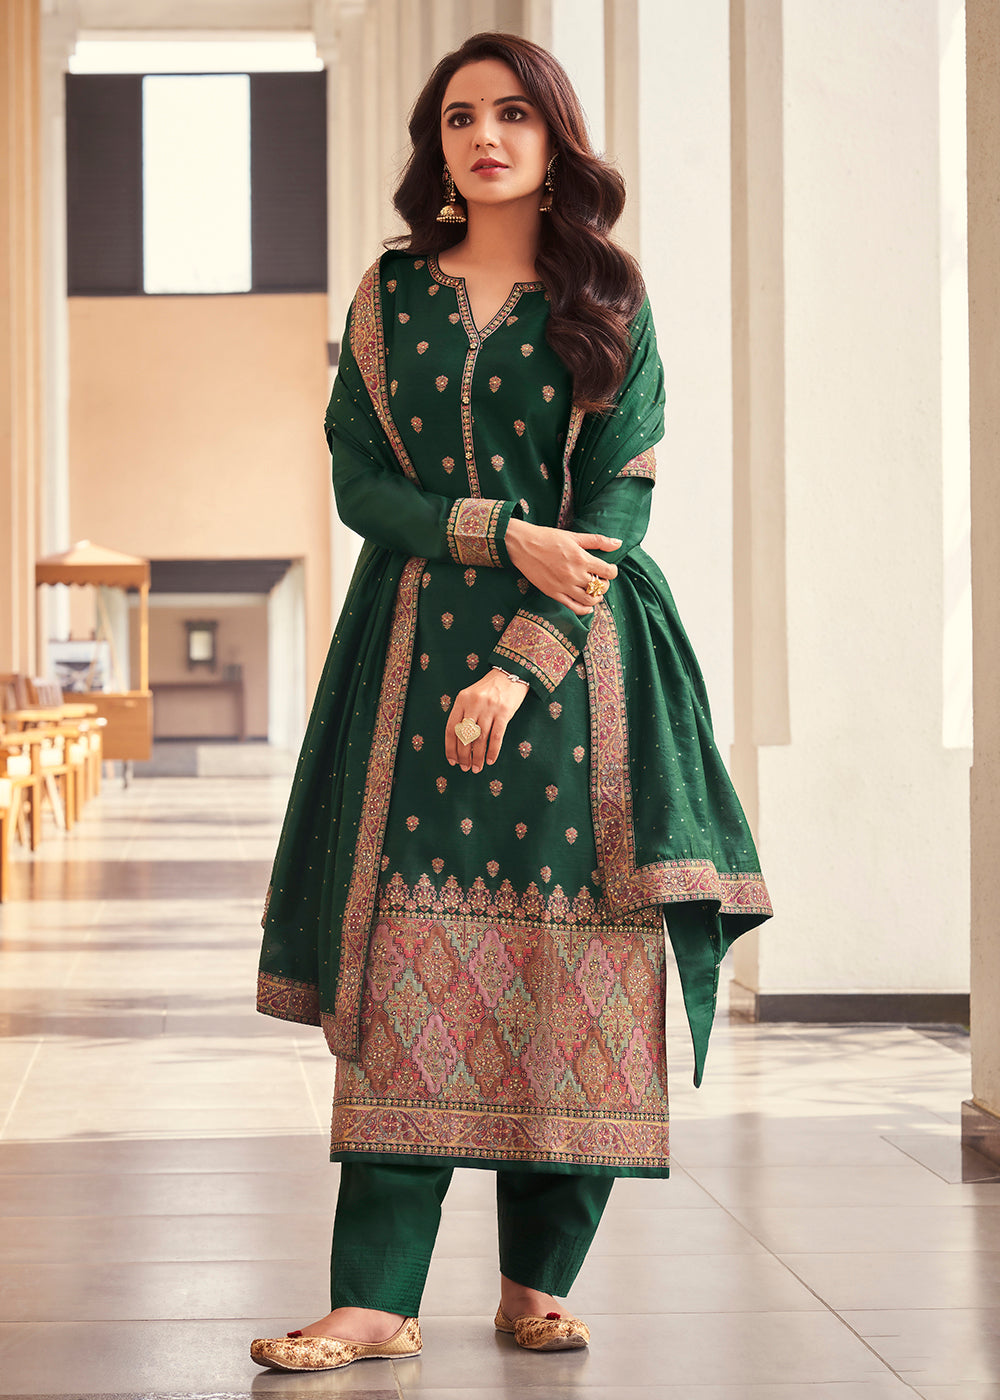 Buy Now Green Jacquard Embordered Festive Pant Salwar Suit Online in USA, UK, Canada & Worldwide at Empress Clothing.